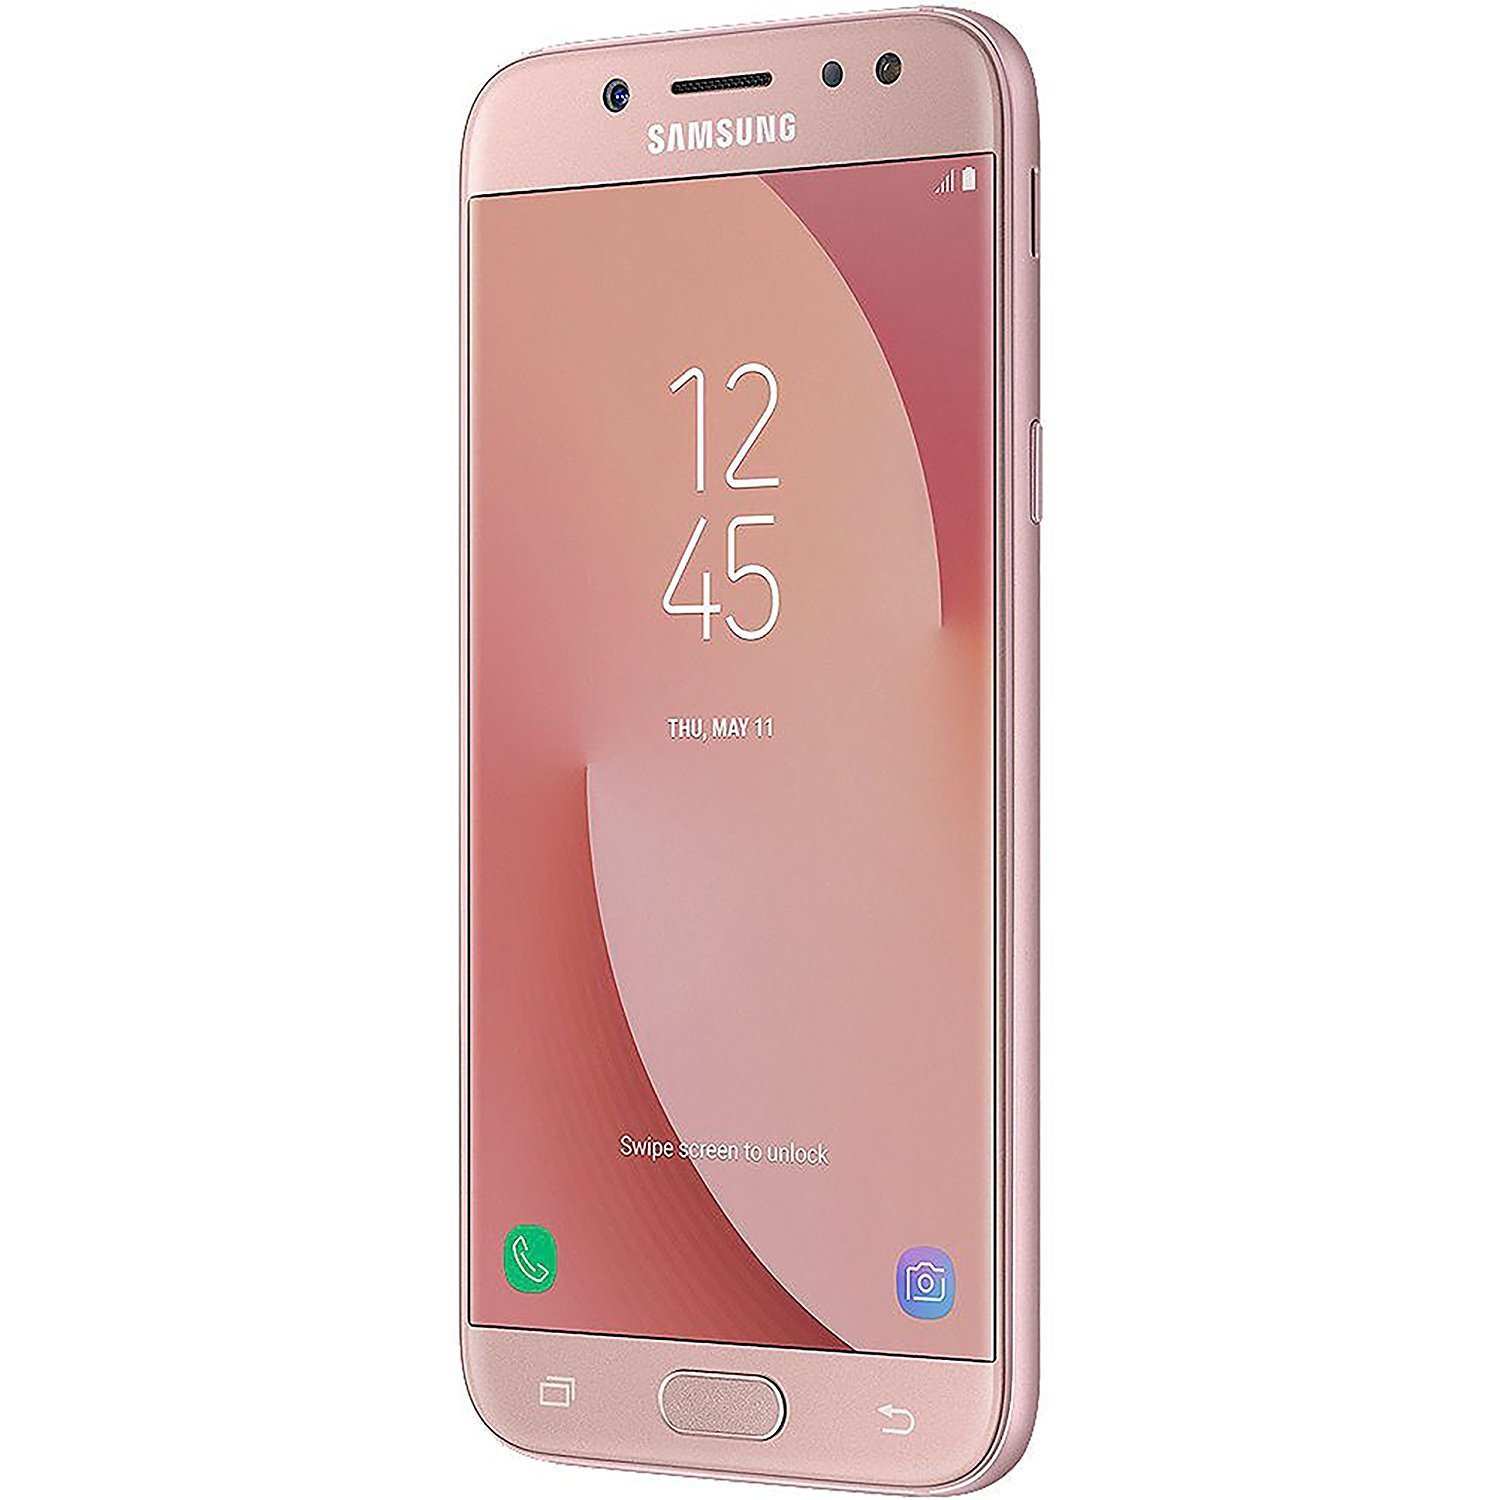 Samsung Galaxy J7 Pro Specs Review Release Date Phonesdata